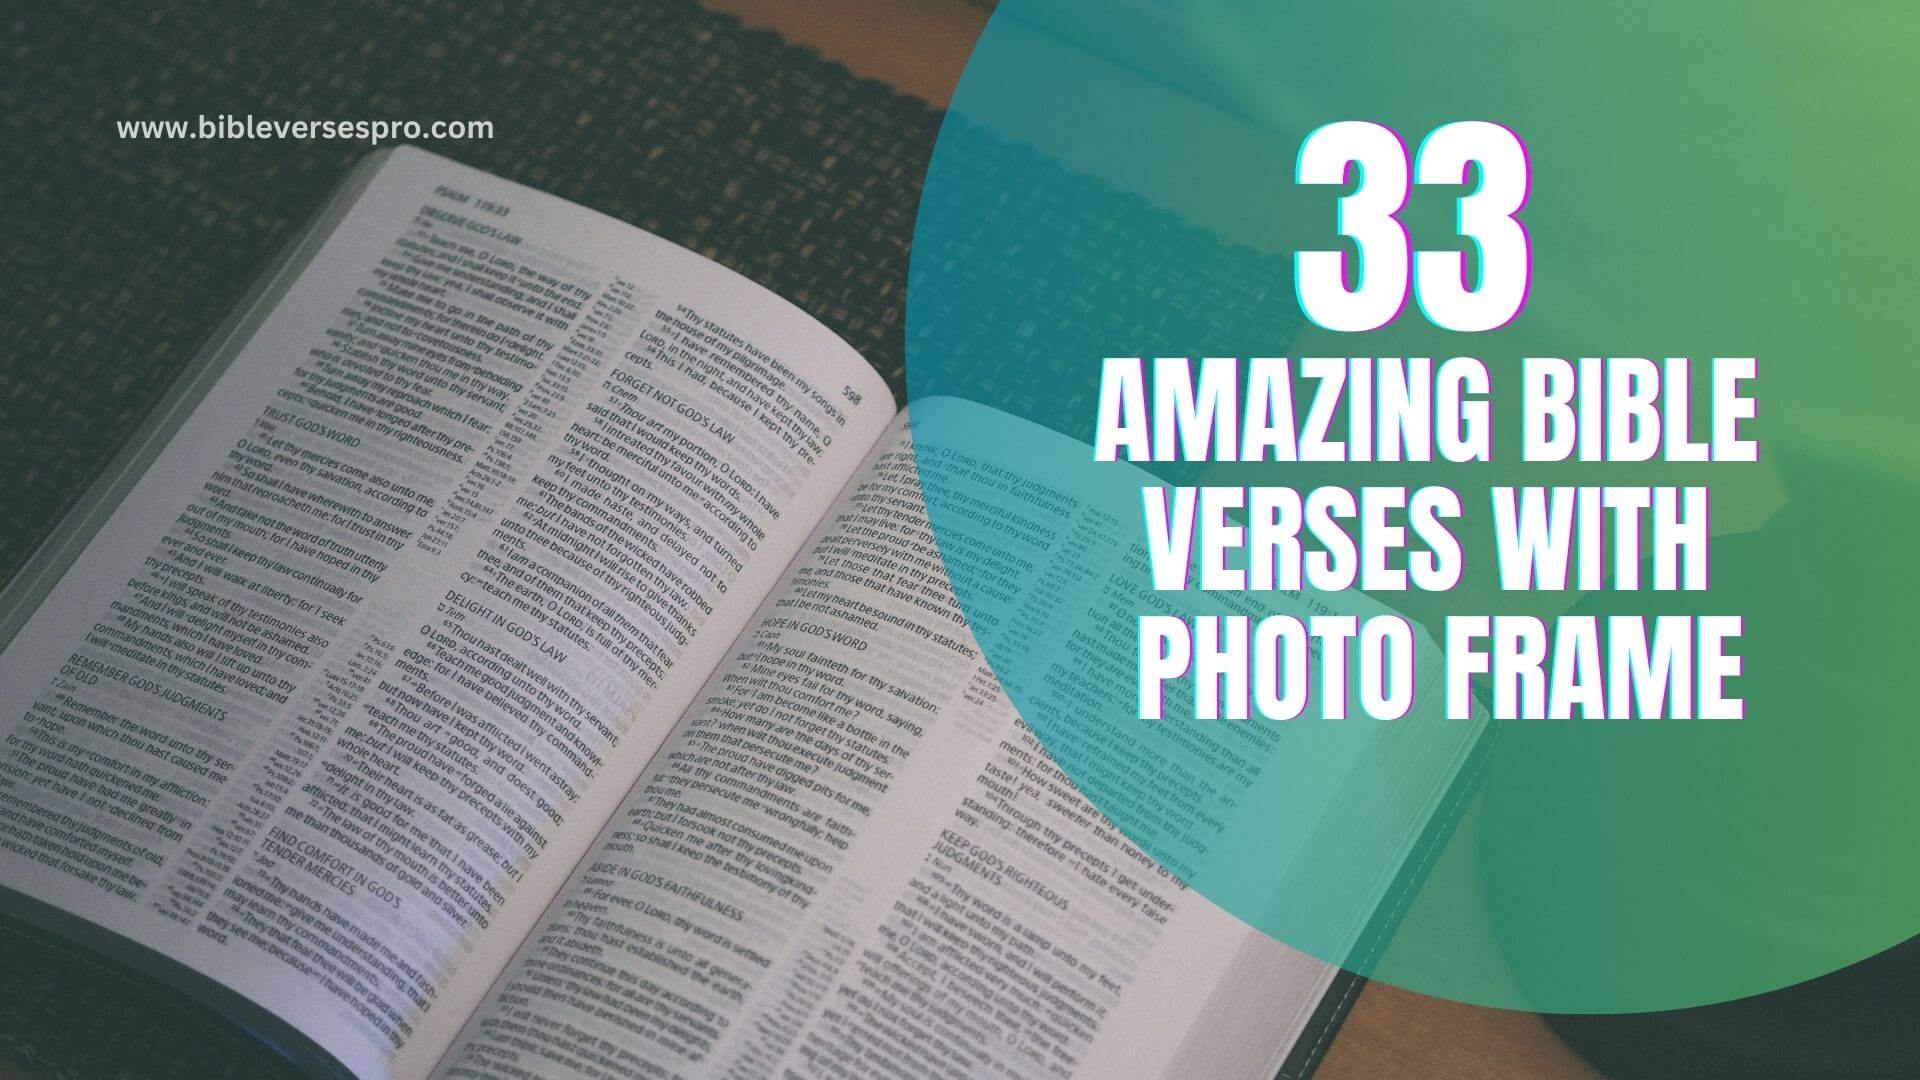 AMAZING BIBLE VERSES WITH PHOTO FRAME